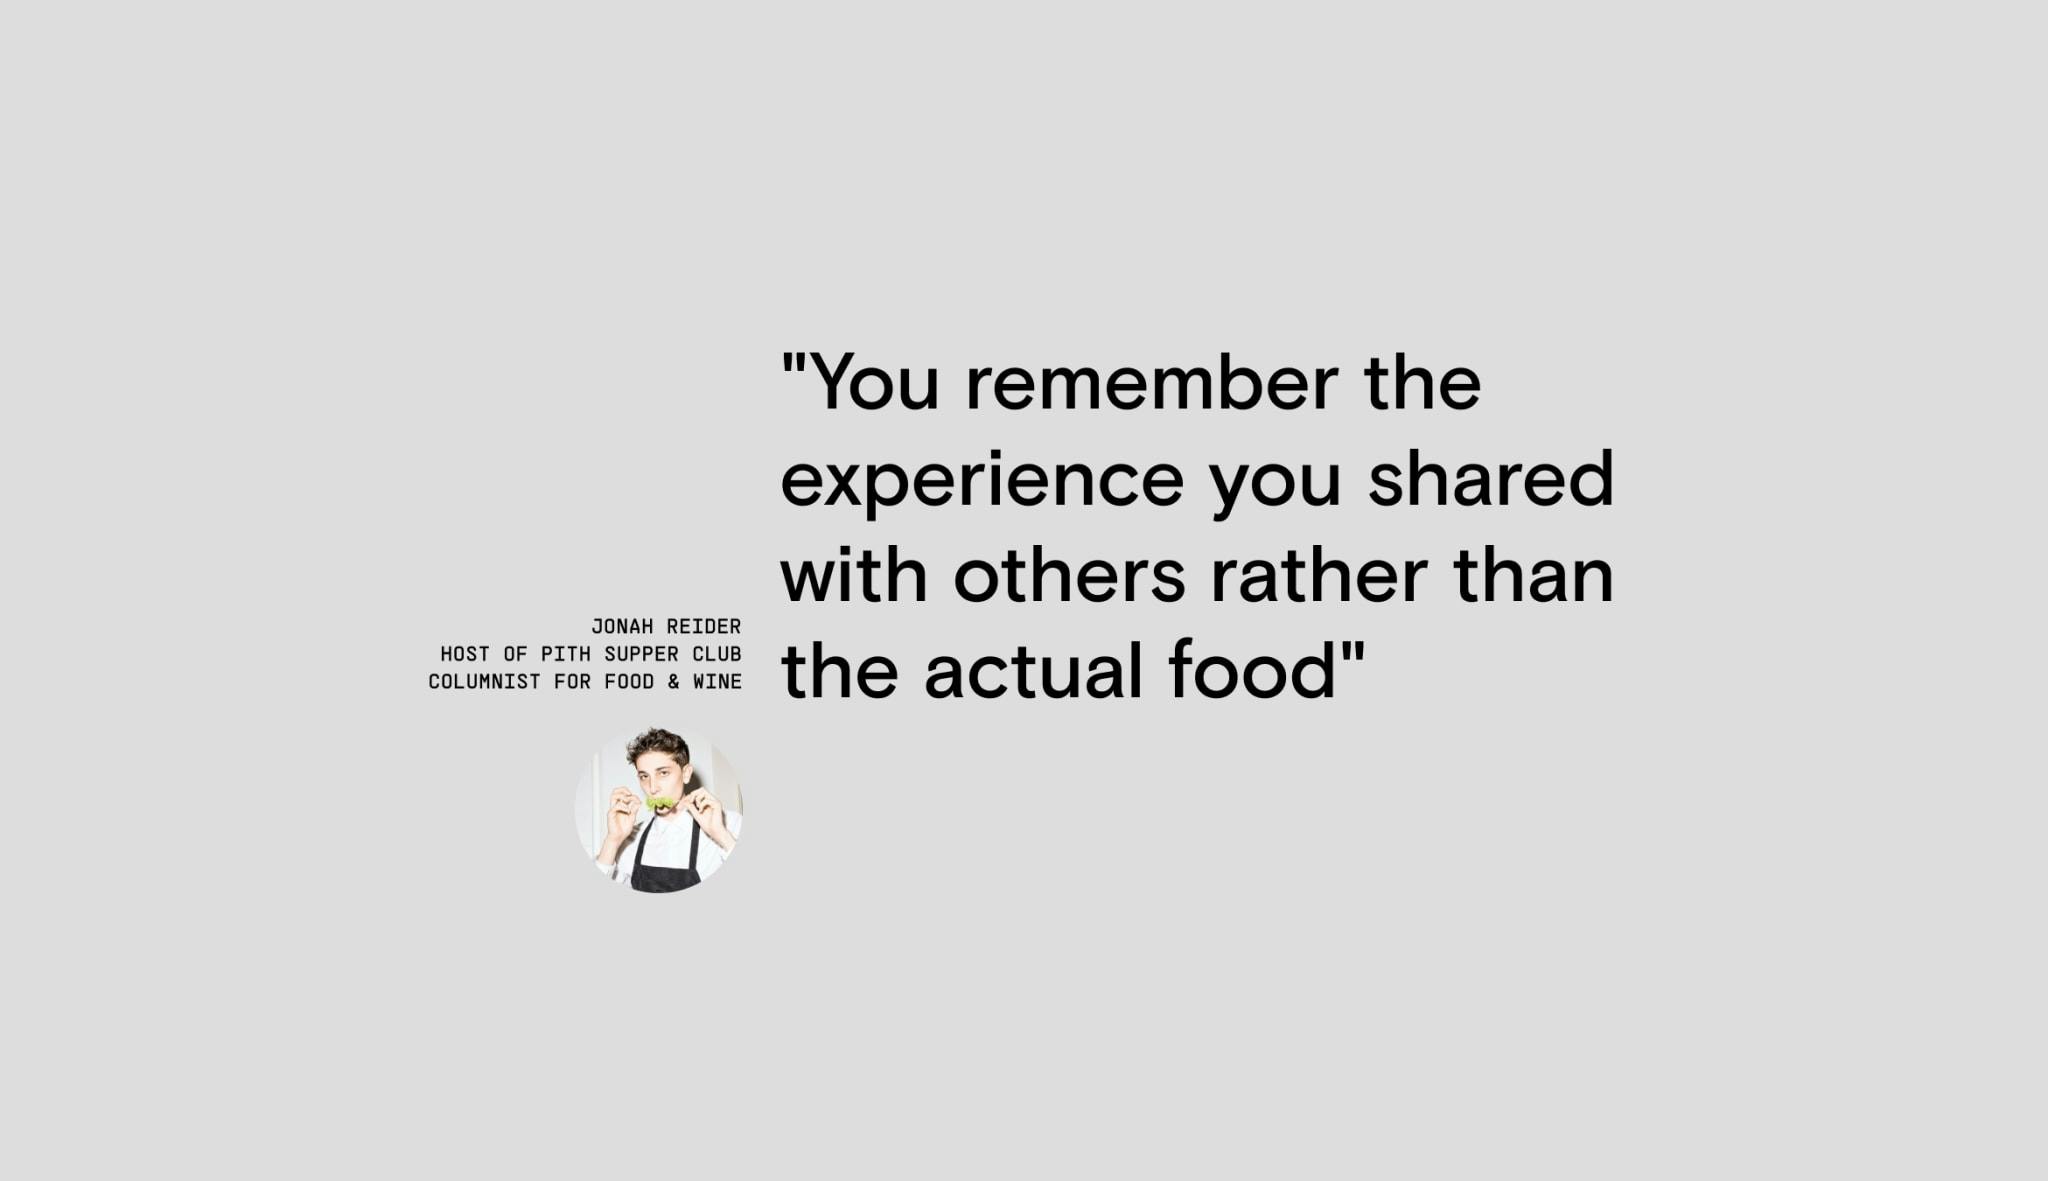 Quote: "You remember the experience you shared with others rather than the actual food" – Jonah Reider